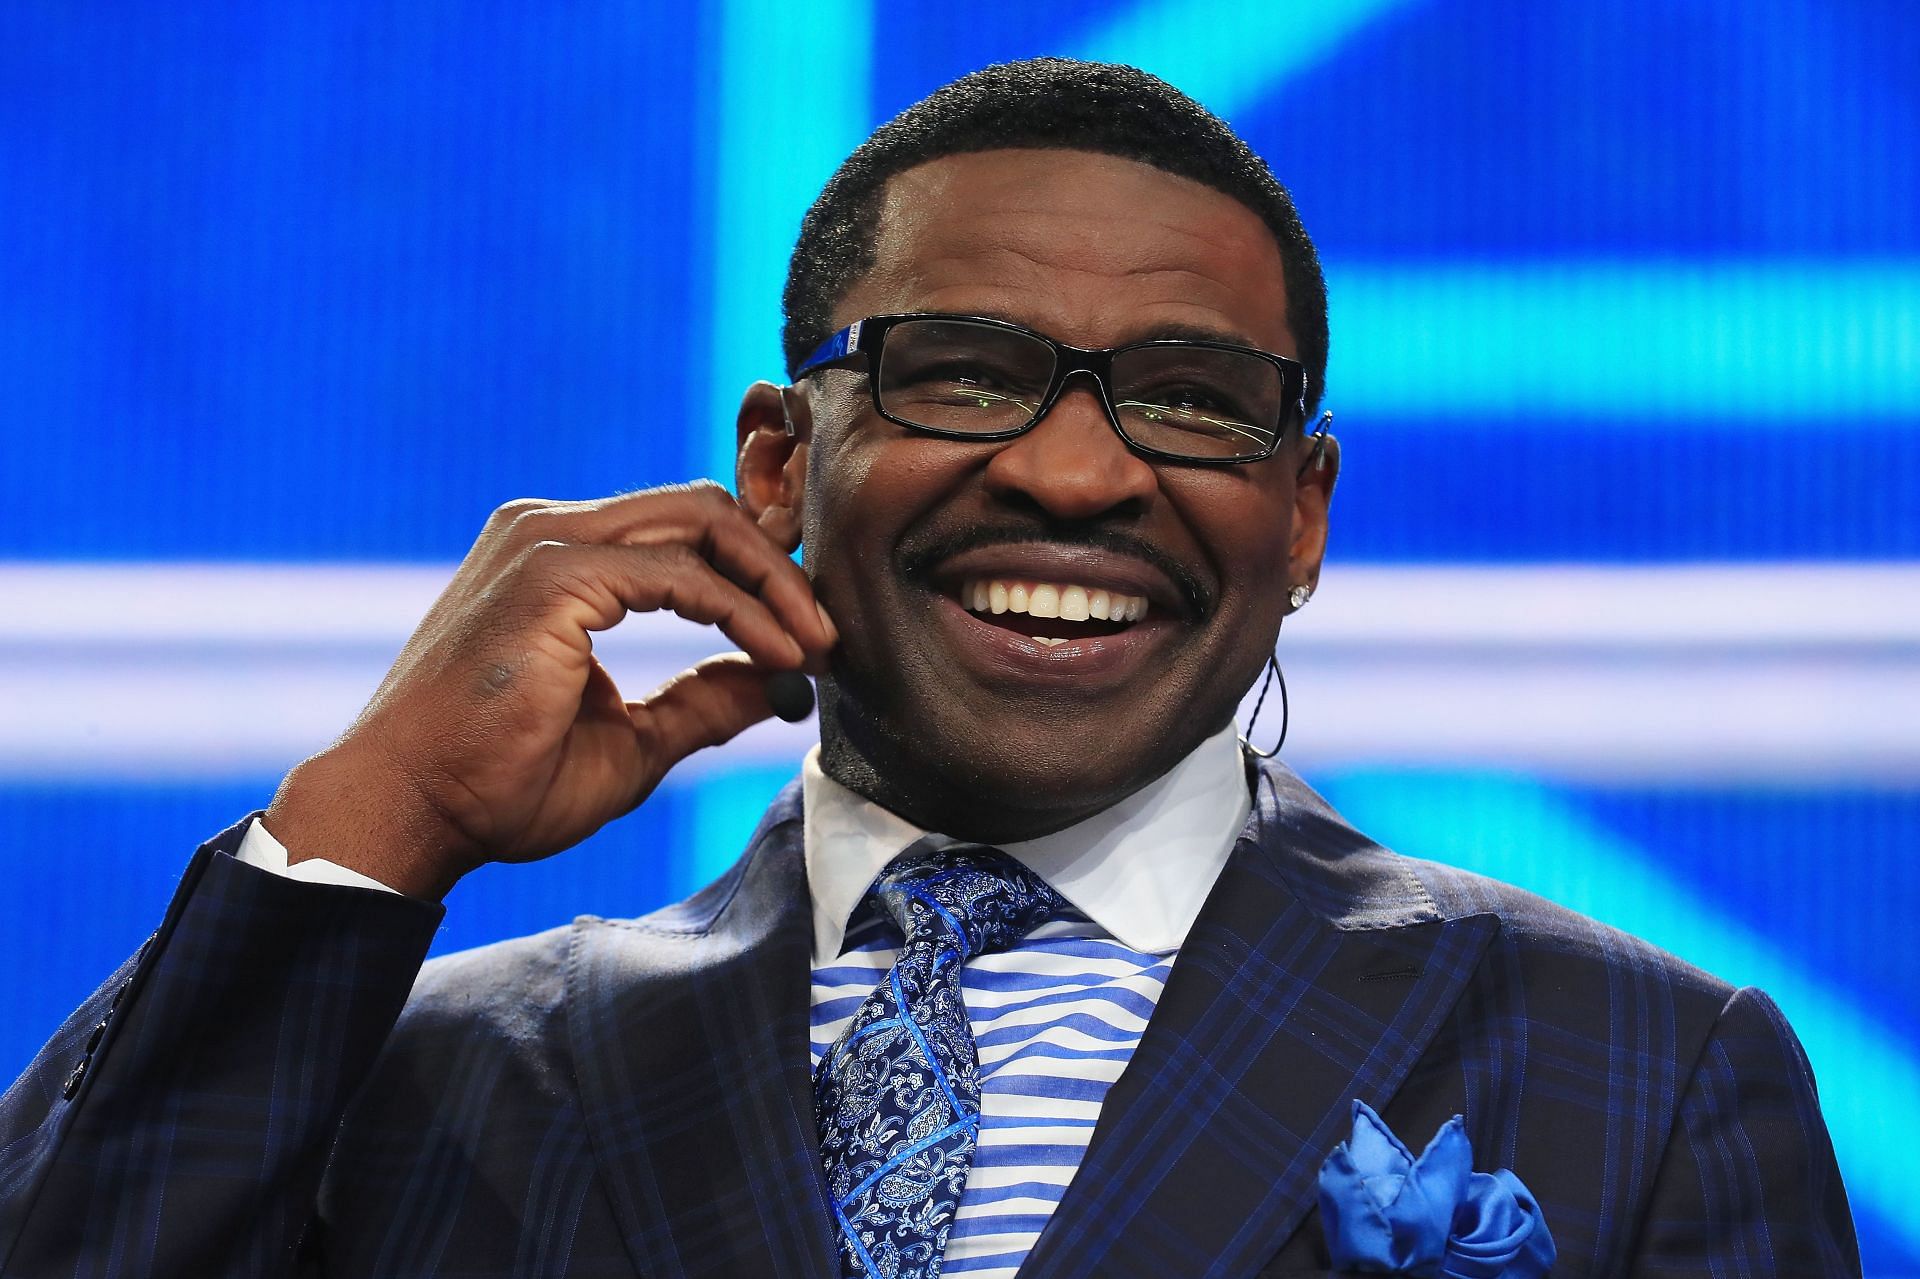 Michael Irvin at the 2018 NFL Draft